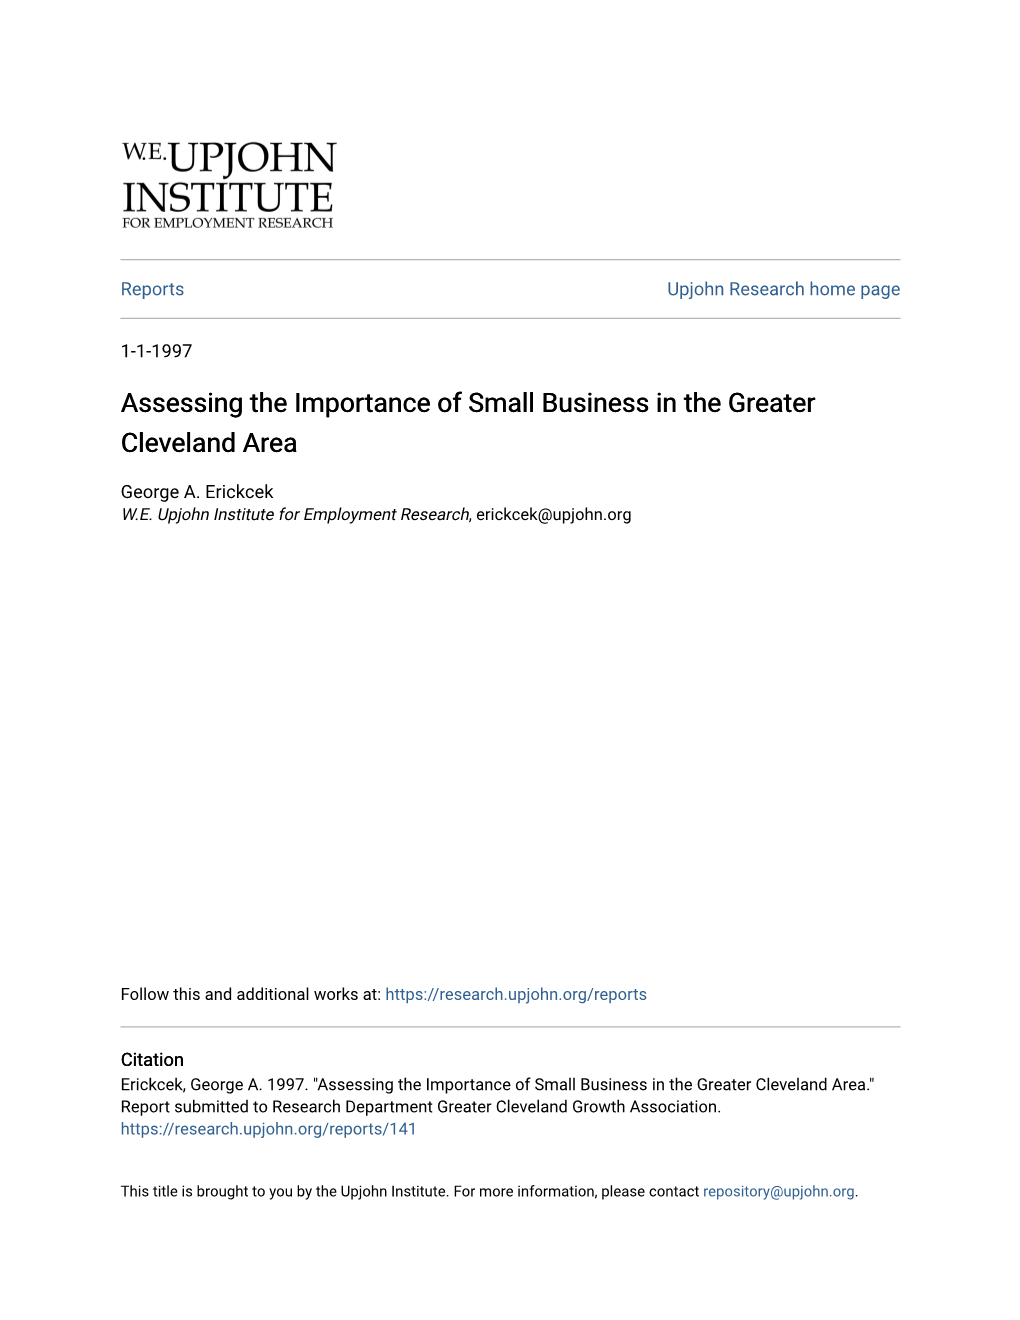 Assessing the Importance of Small Business in the Greater Cleveland Area